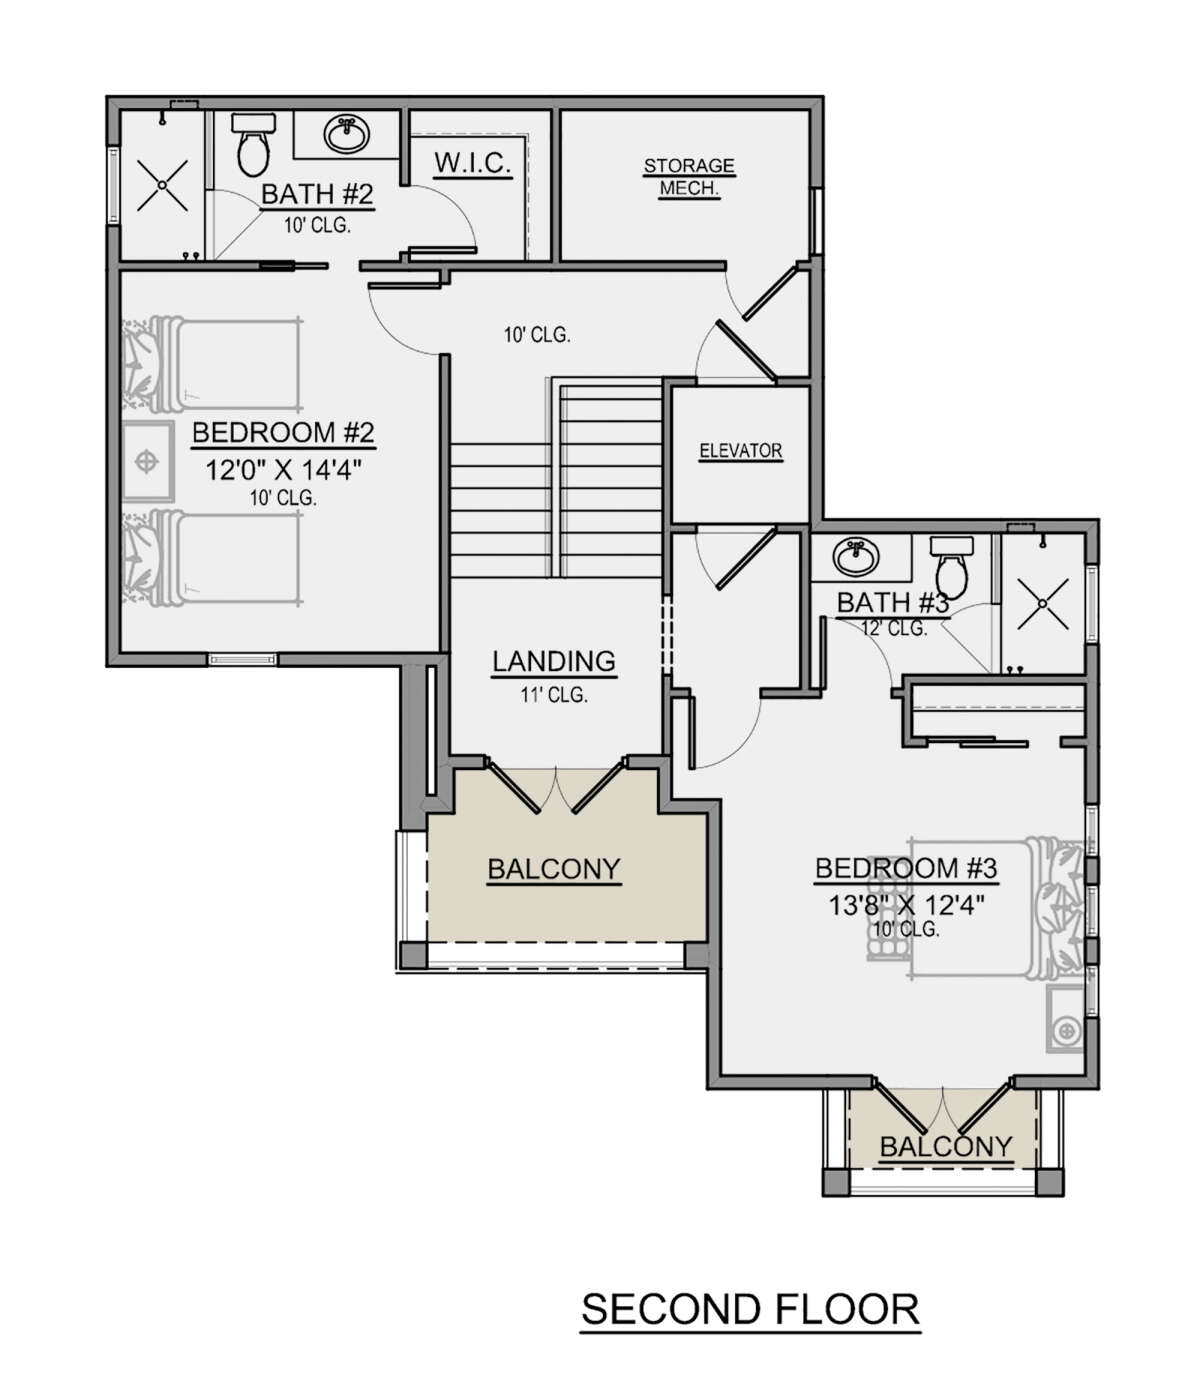 Second Floor for House Plan #5565-00067